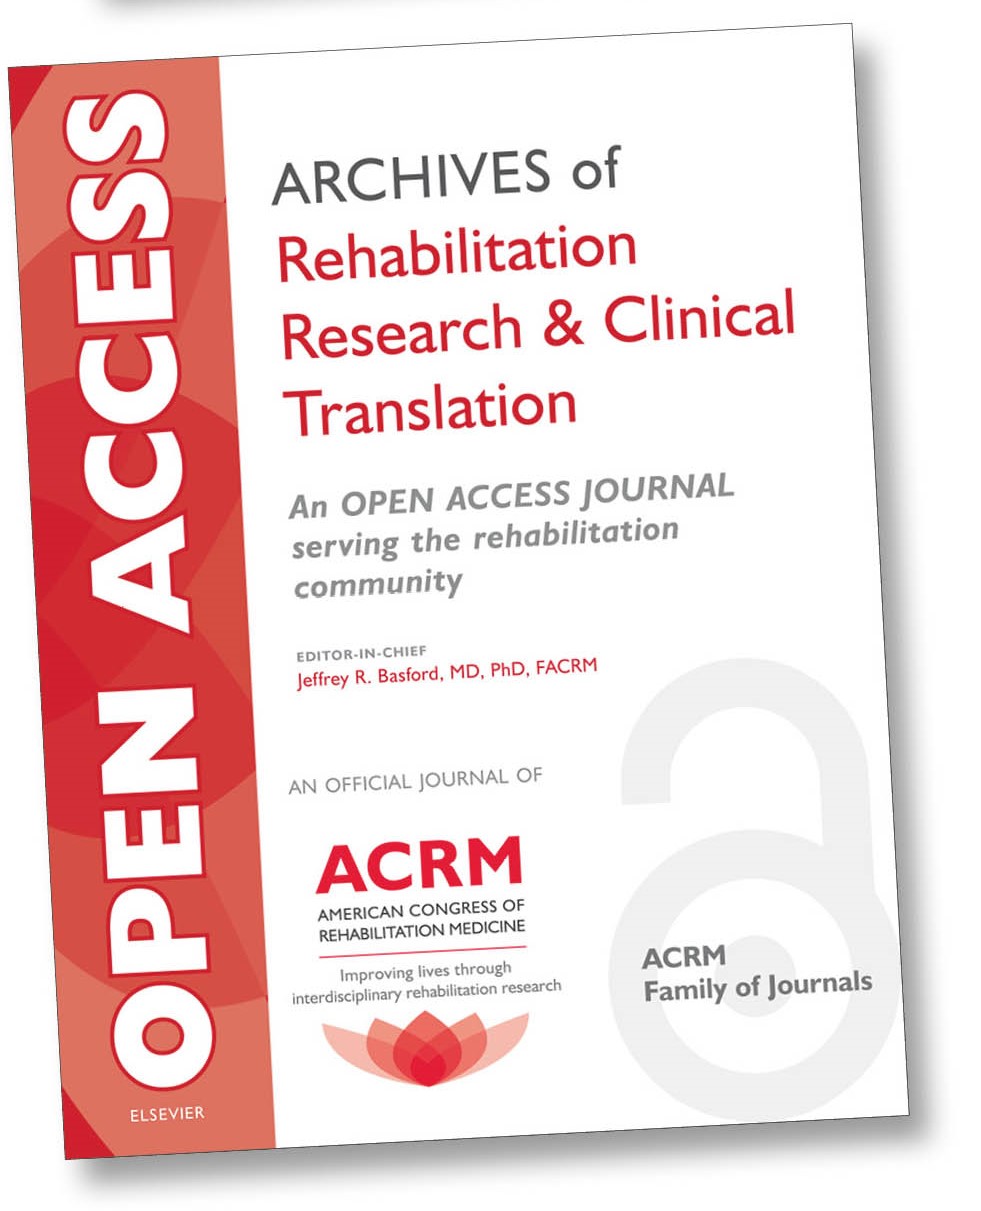 Archives of Rehabilitation Research & Clinical Translation